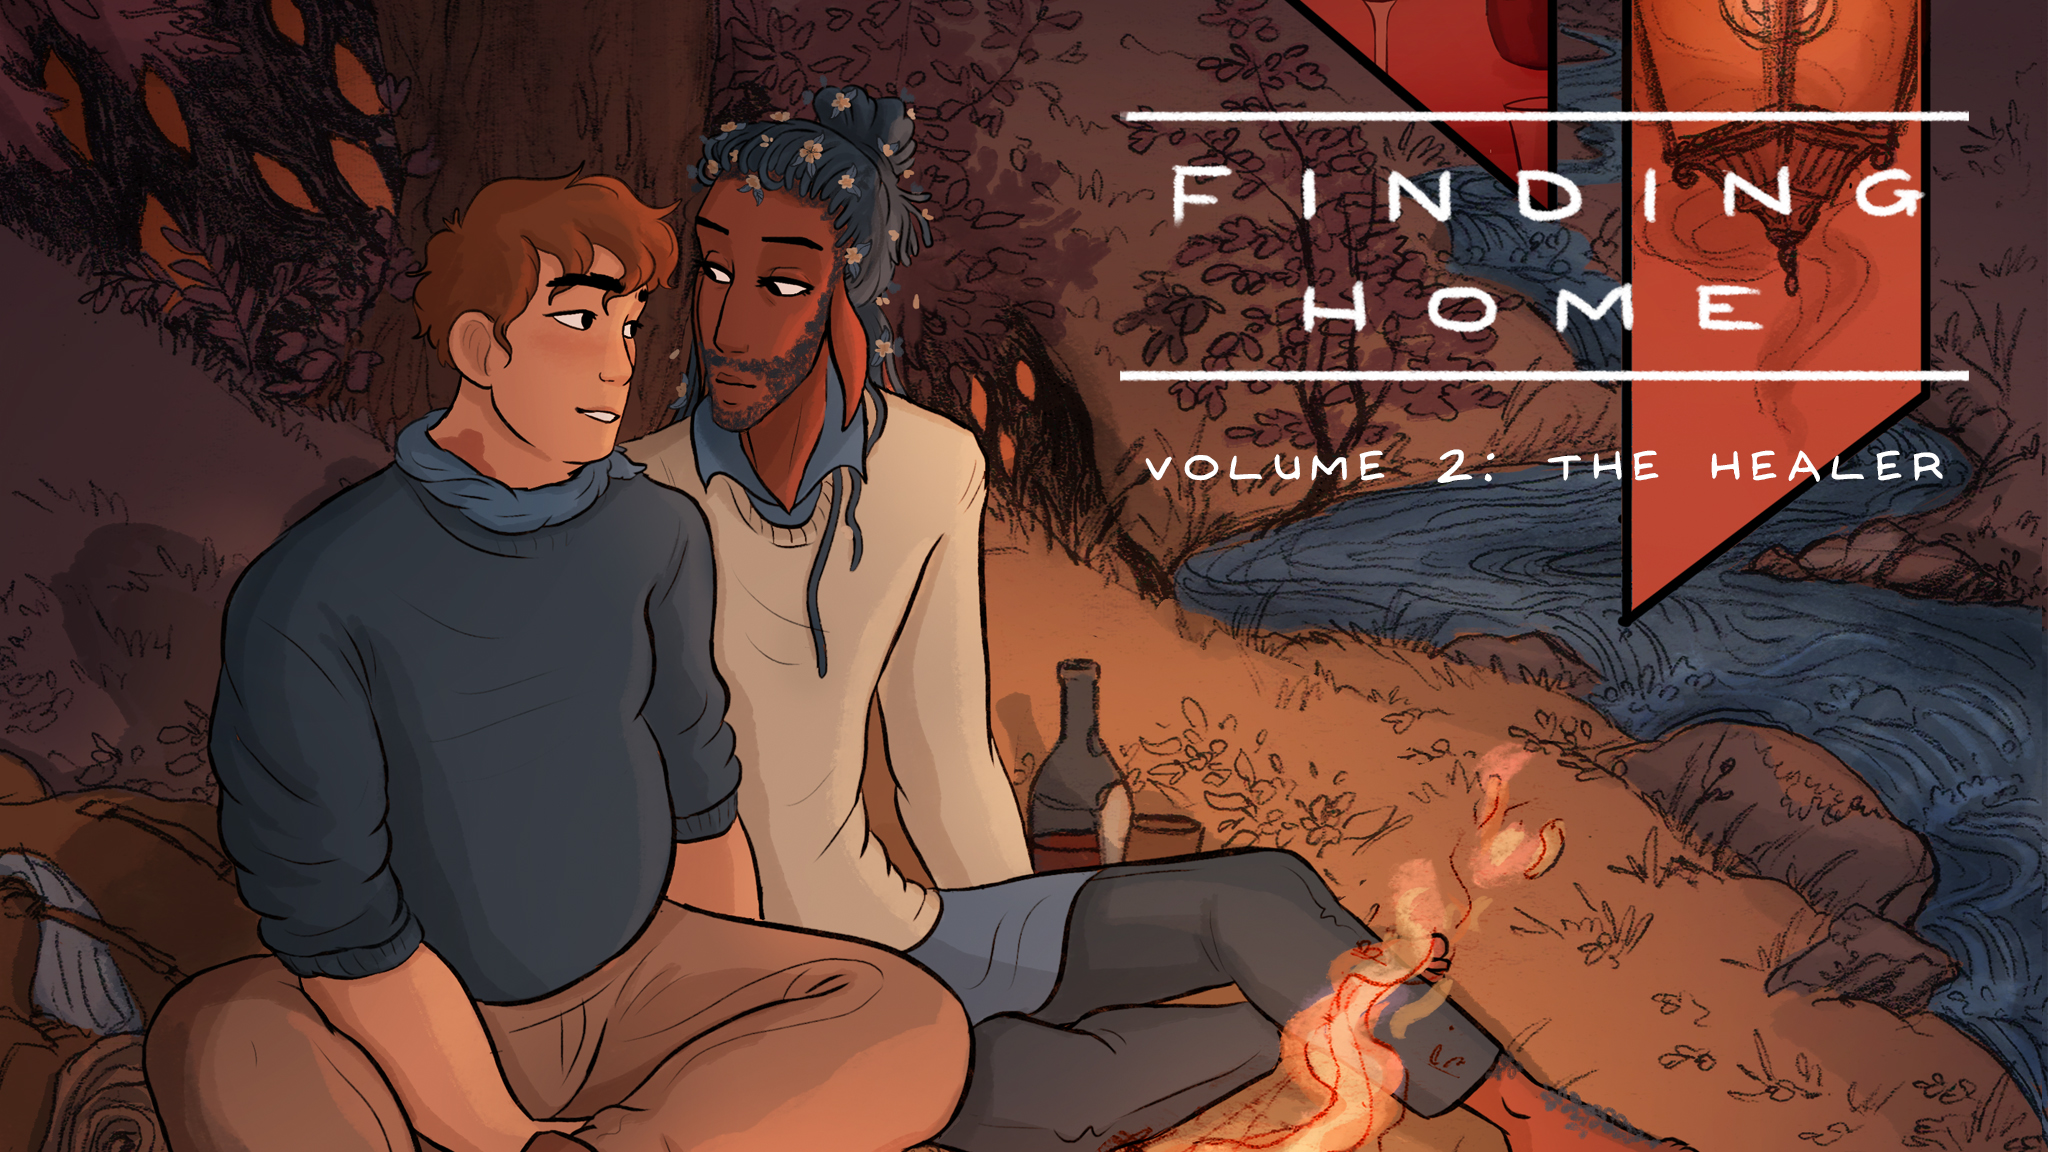 A cropped image of the second volume of the comic series "Finding Home" by Hari Conner.  Two men sit by a fire, in a forest next to a river.  The man on the left is human, while the one on the right is fae with green hair full of flowers.  They are gazing into each other's eyes, the human looking fond and blushing slightly while the fae looks wary and guarded.